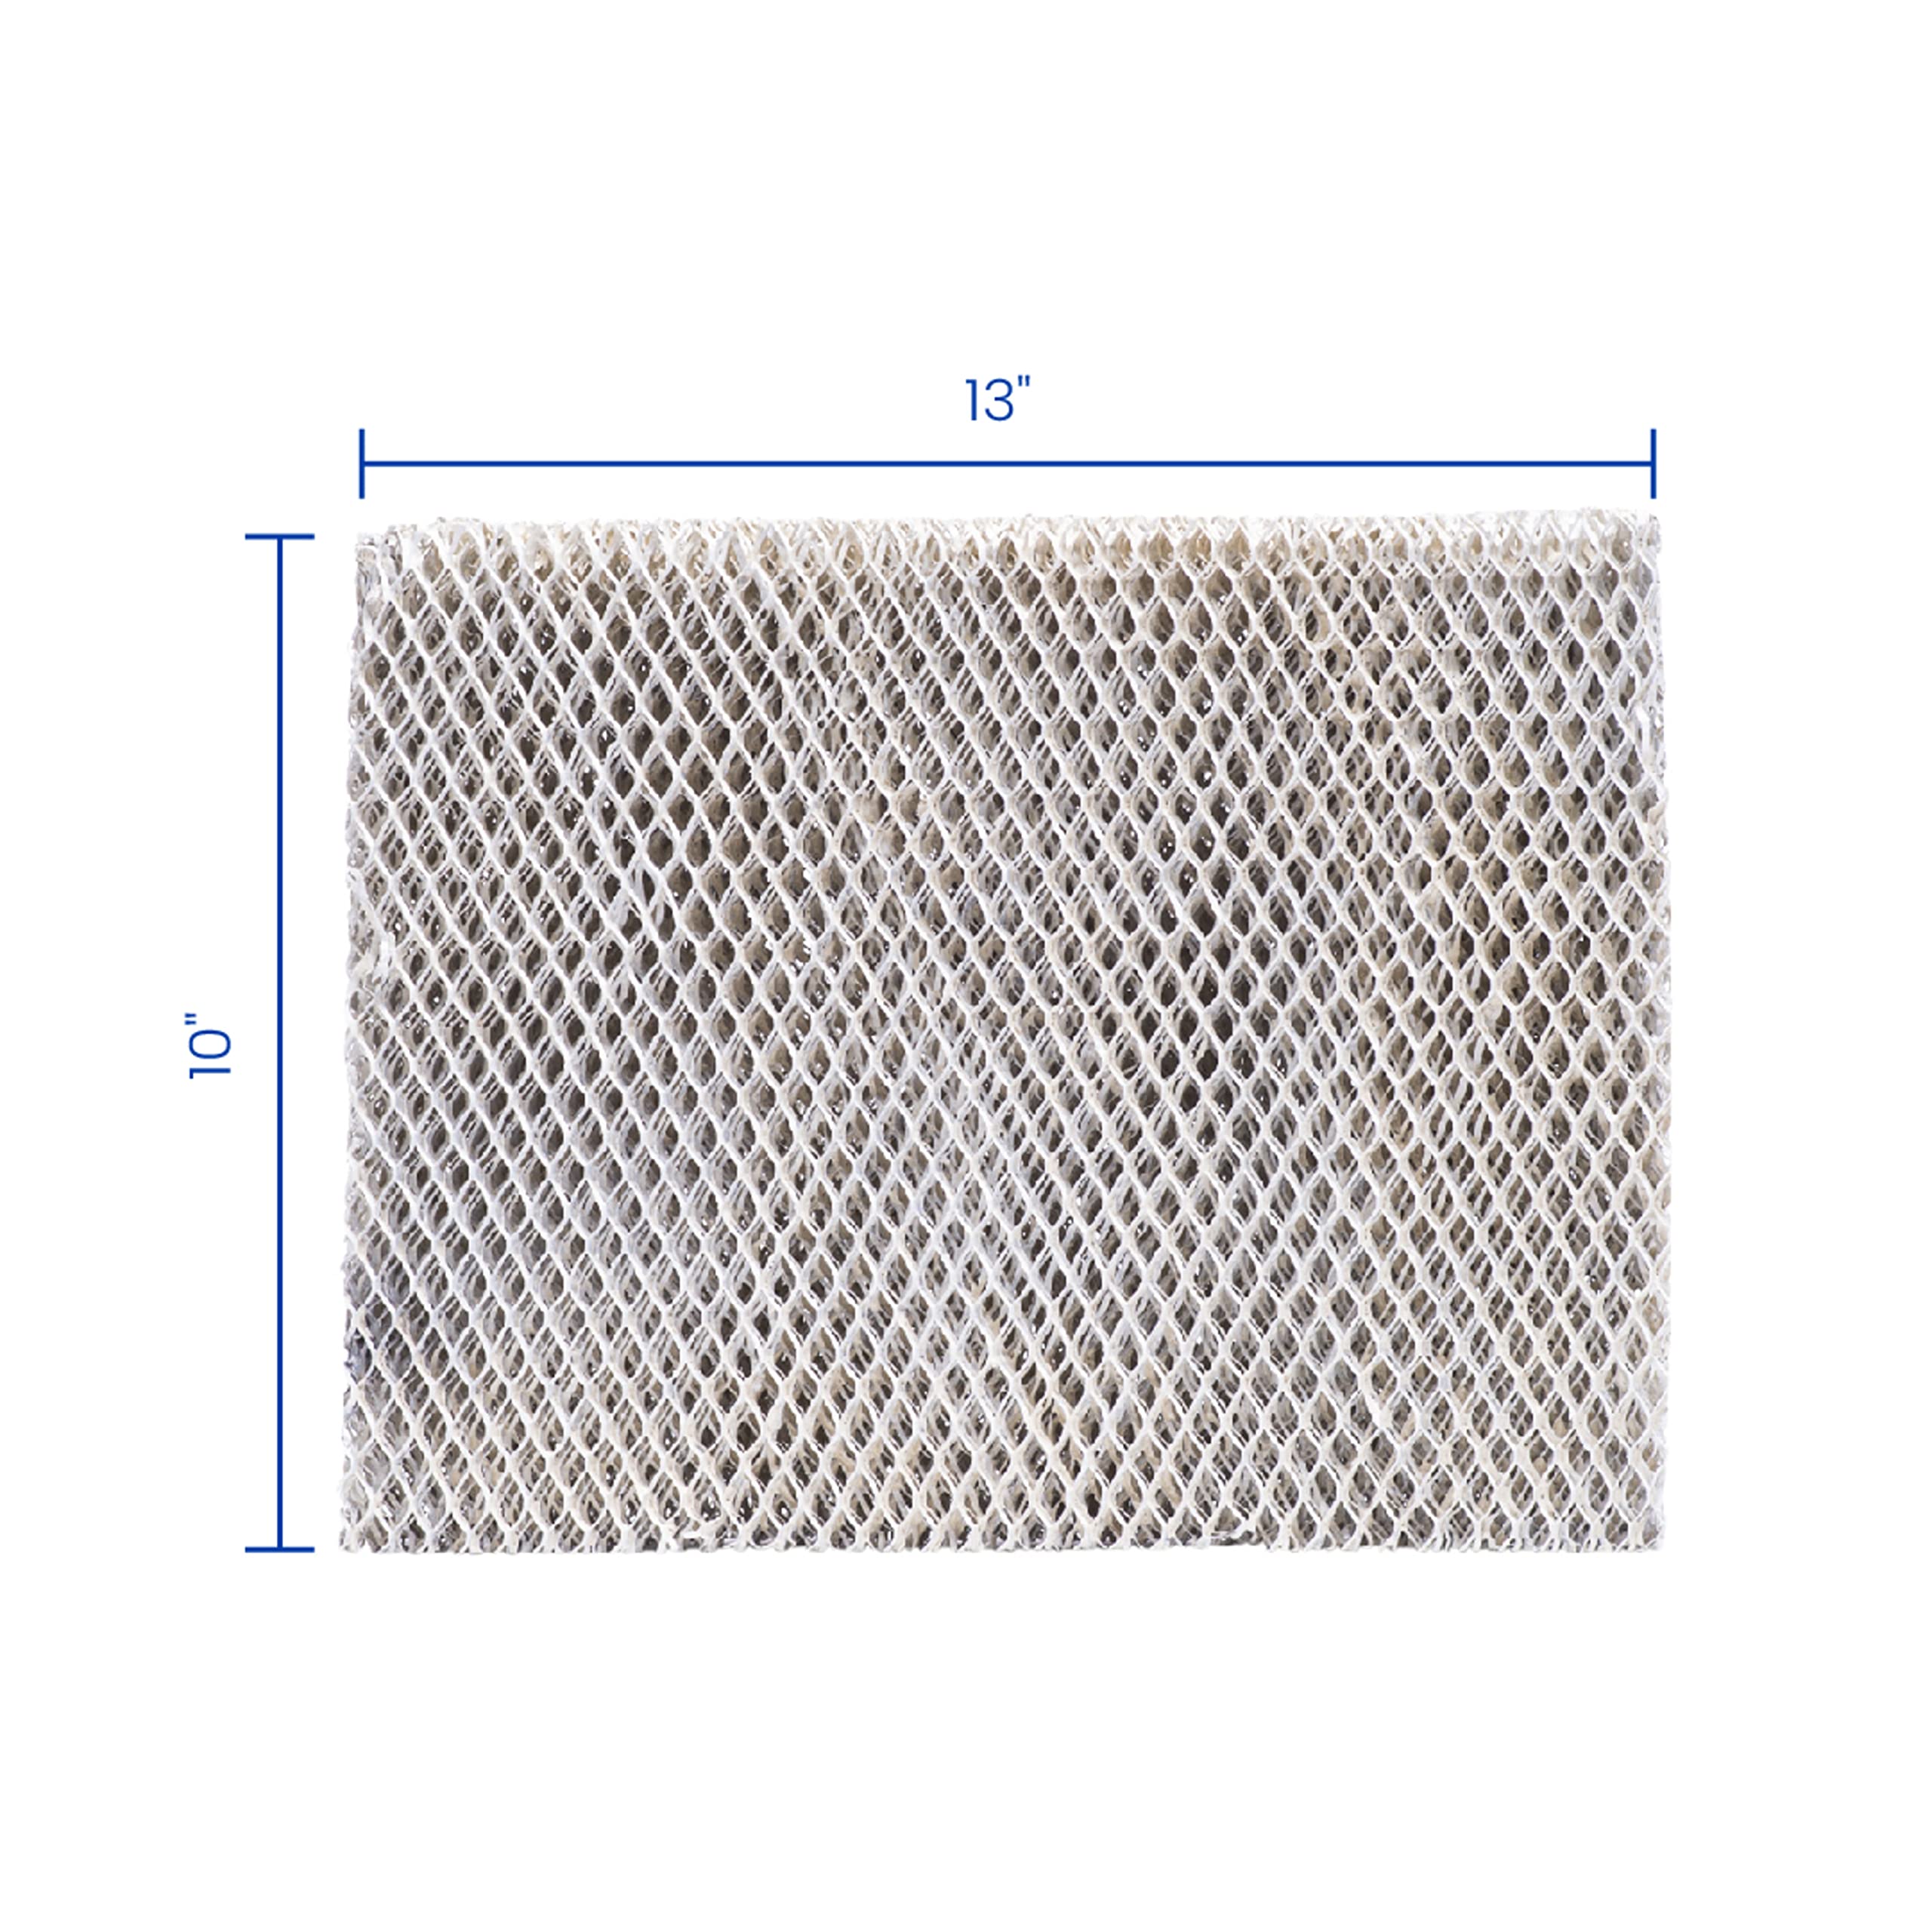 Aprilaire 35 Water Panel Humidifier Filter Replacement for Aprilaire Whole House Humidifier Models 350, 360, 560, 560A, 568, 600, 600A, 600M, 700, 700A, 700M, 760, 760A, 768 (Pack of 1)